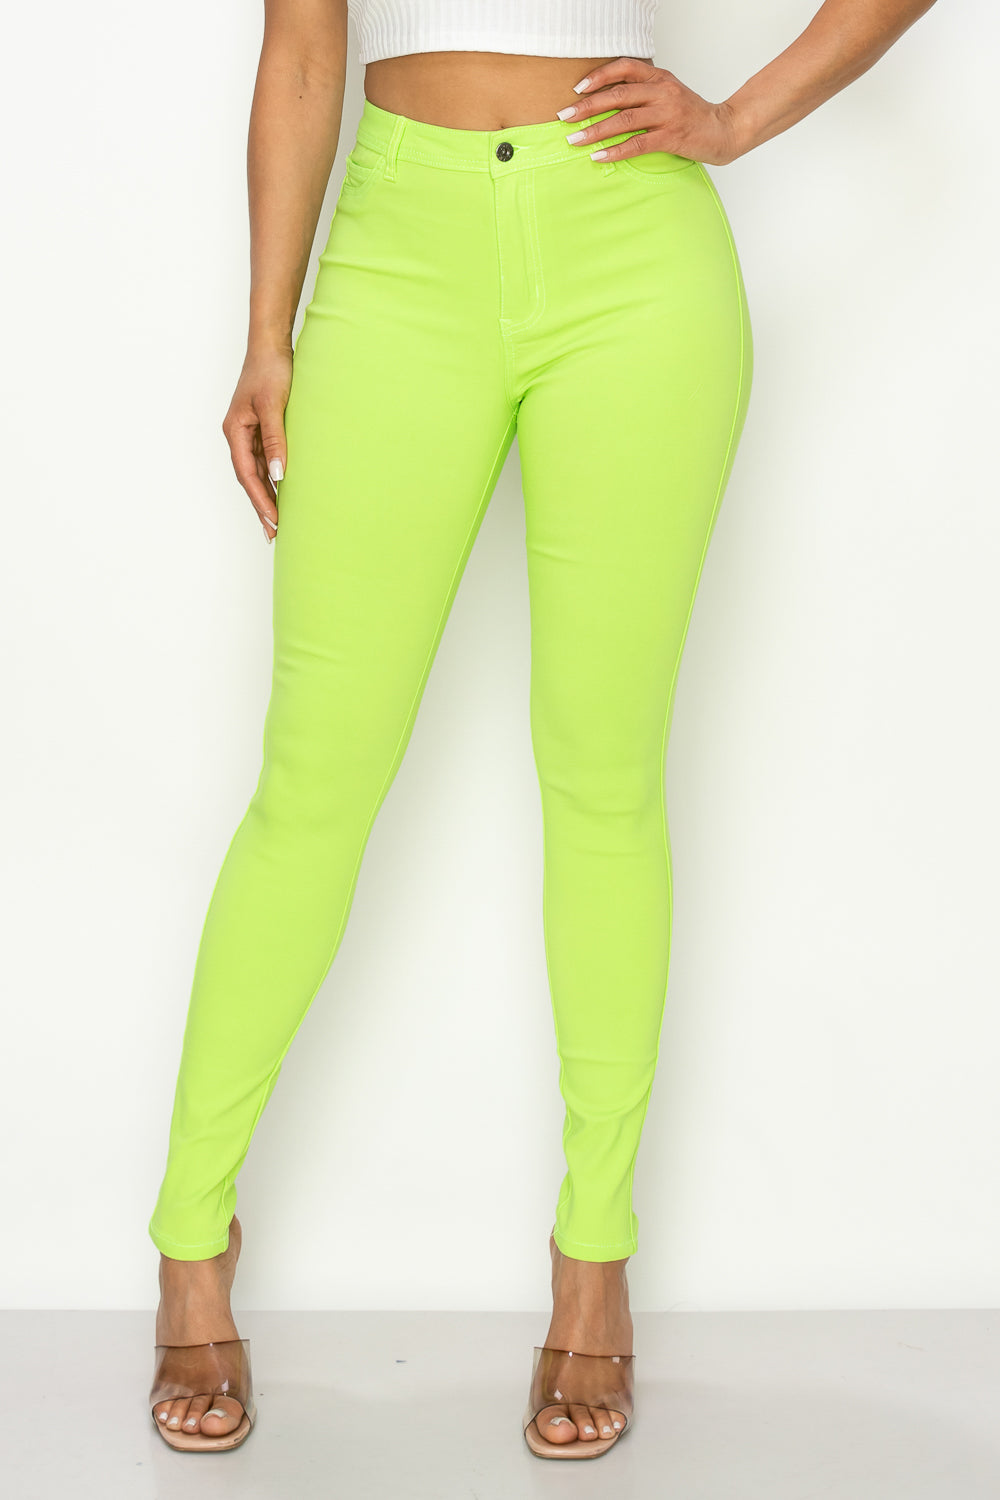 Pure Neon Green Linen Pants : Made To Measure Custom Jeans